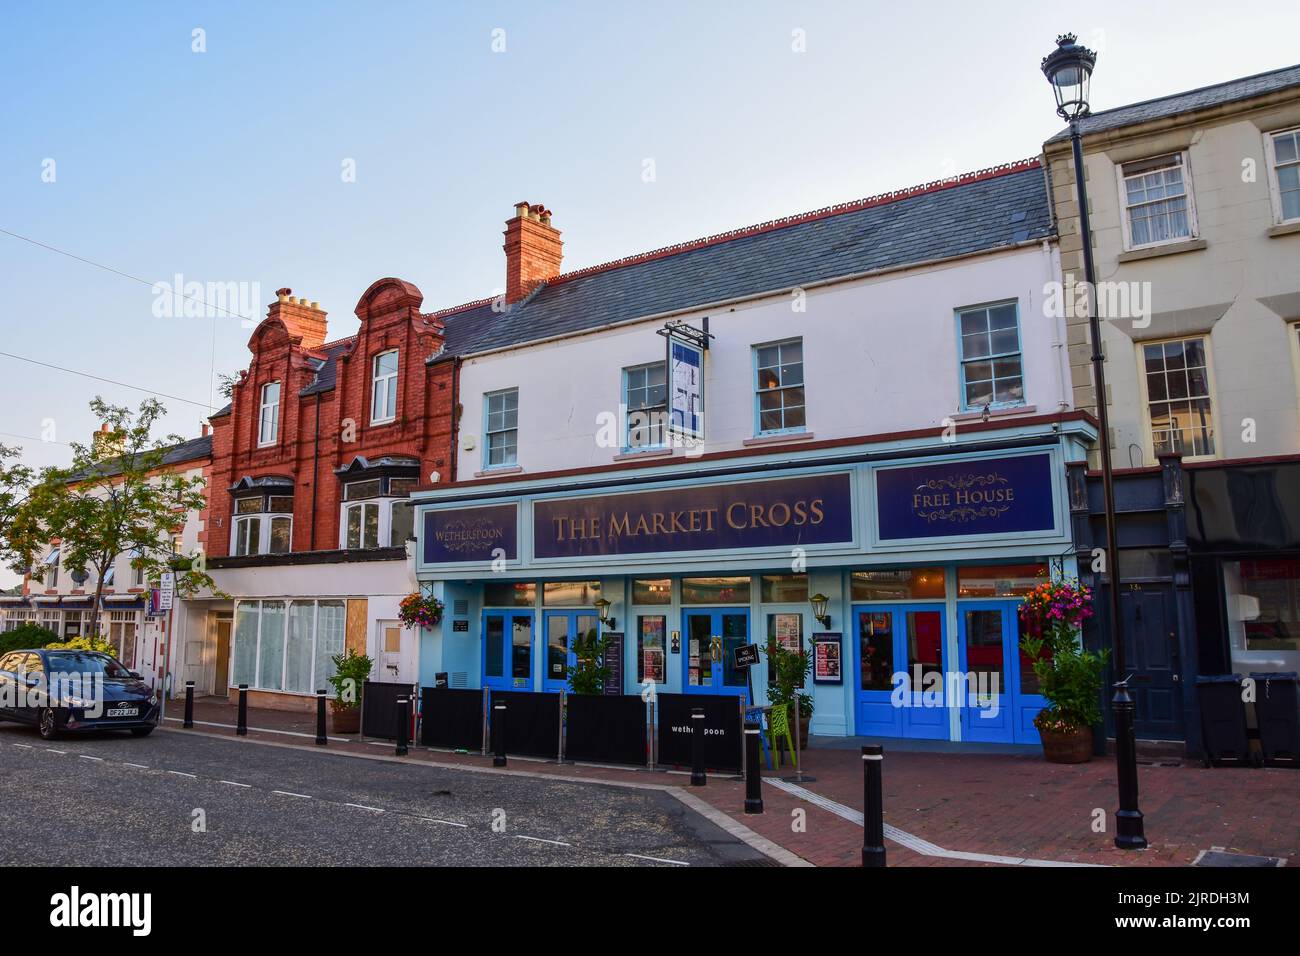 Holywell, Flintshire, UK: Aug 14, 2022: J D Wetherspoon operate a free house pub, The Market Cross, in Holywell Stock Photo